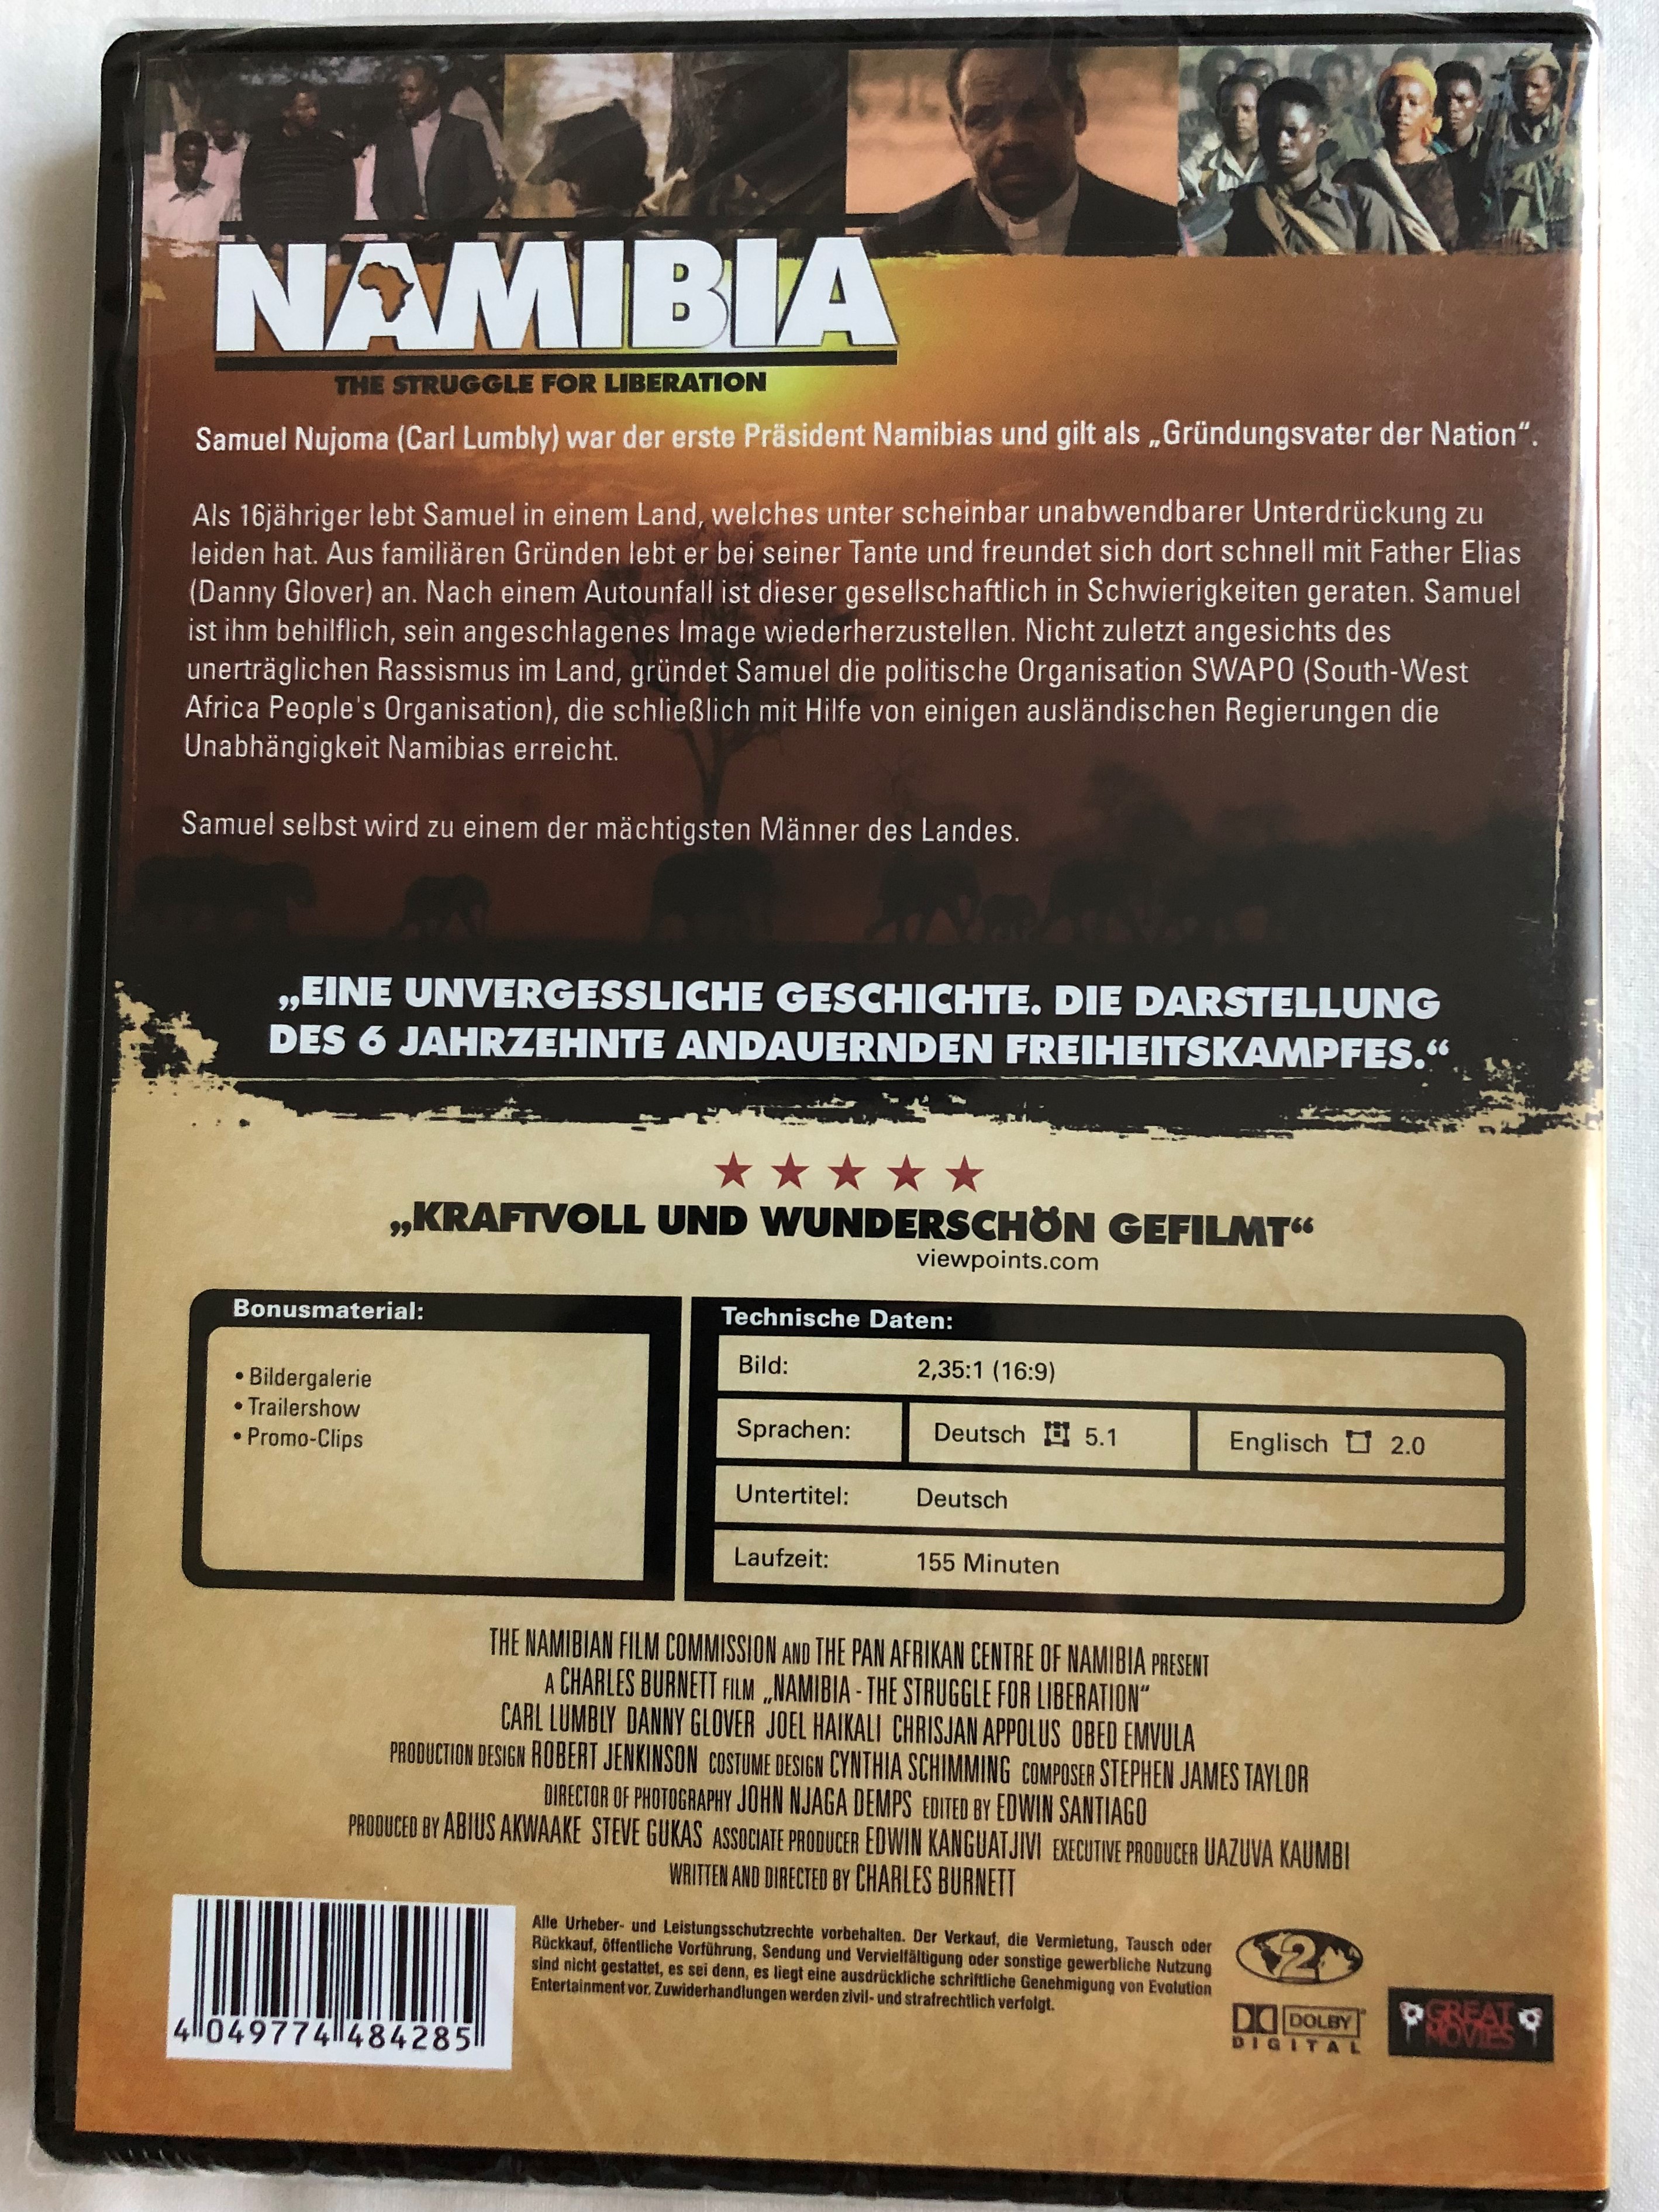 namibia-der-kampf-um-die-freiheit-dvd-2007-namibia-the-struggle-for-liberation-directed-by-charles-burnett-starring-carl-lumbly-danny-glover-chrisjan-appollus-lazarus-jacobs-2-.jpg